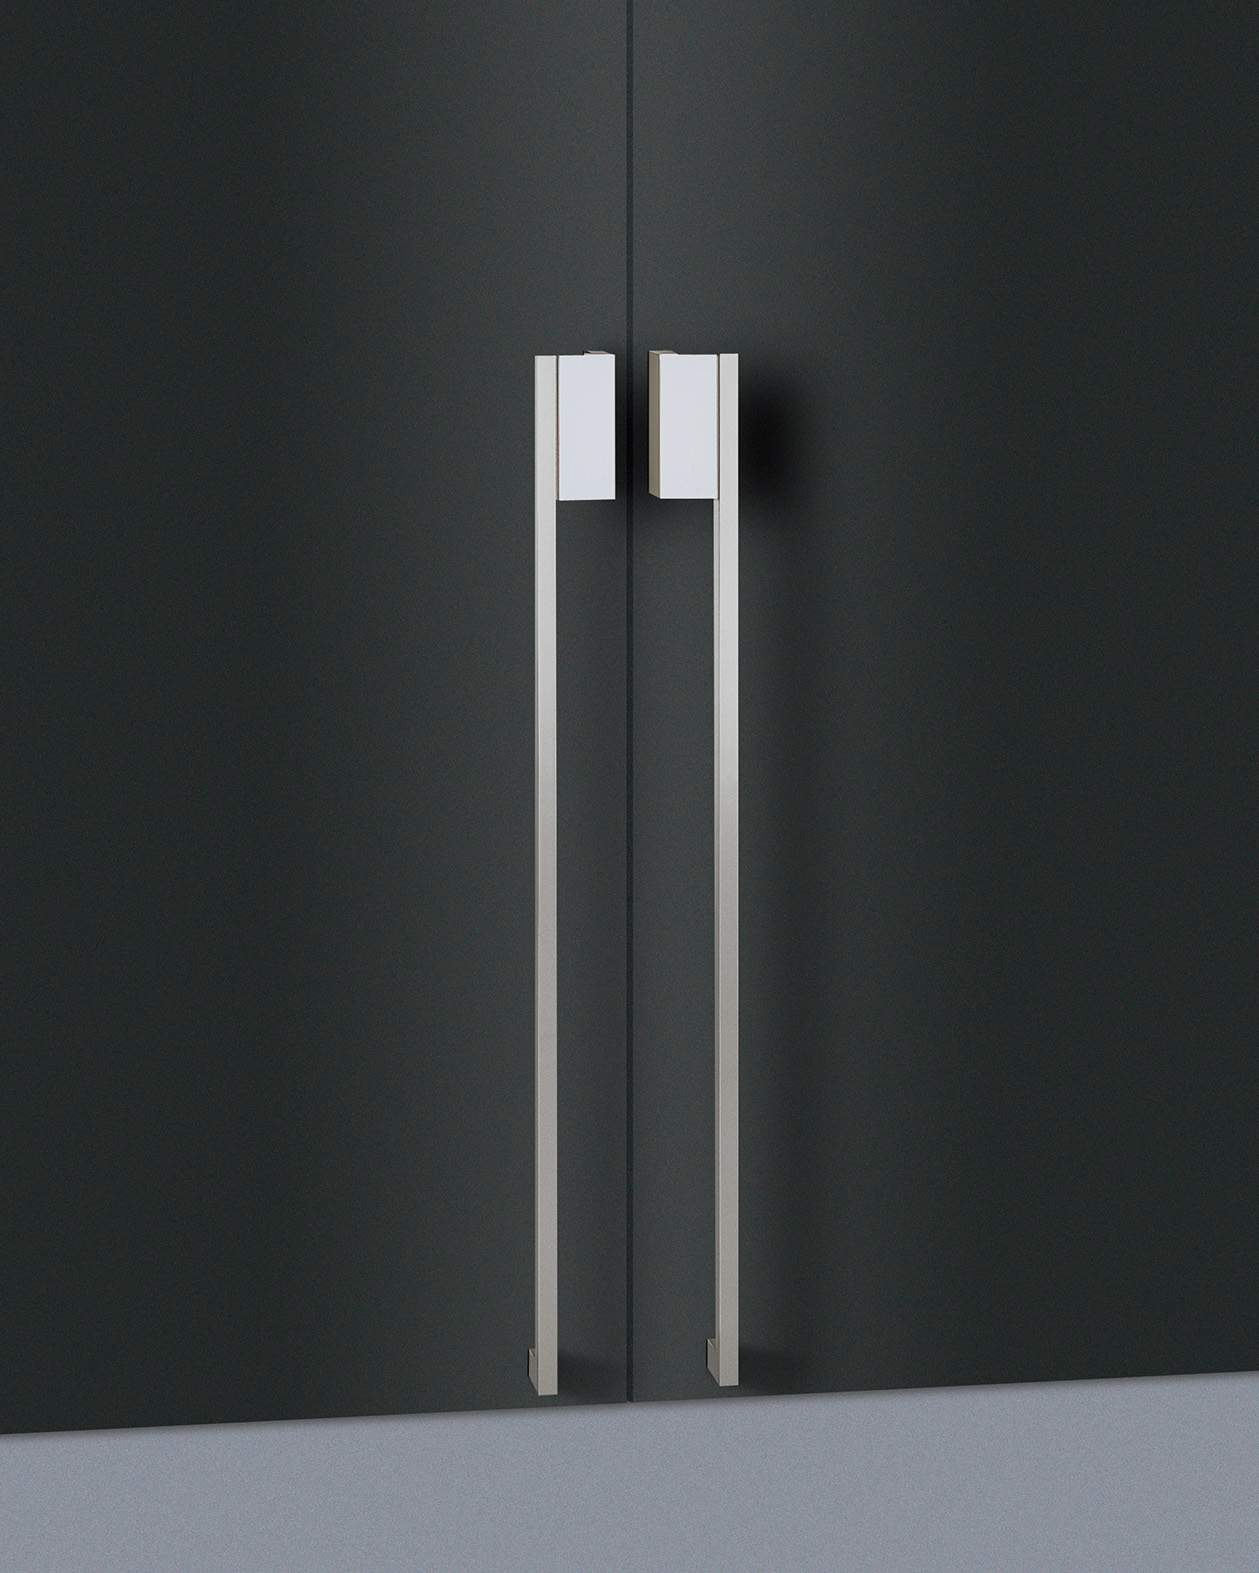 Elmes Of Japan Semi-Long Entry Door Pull by Bellevue Architectural